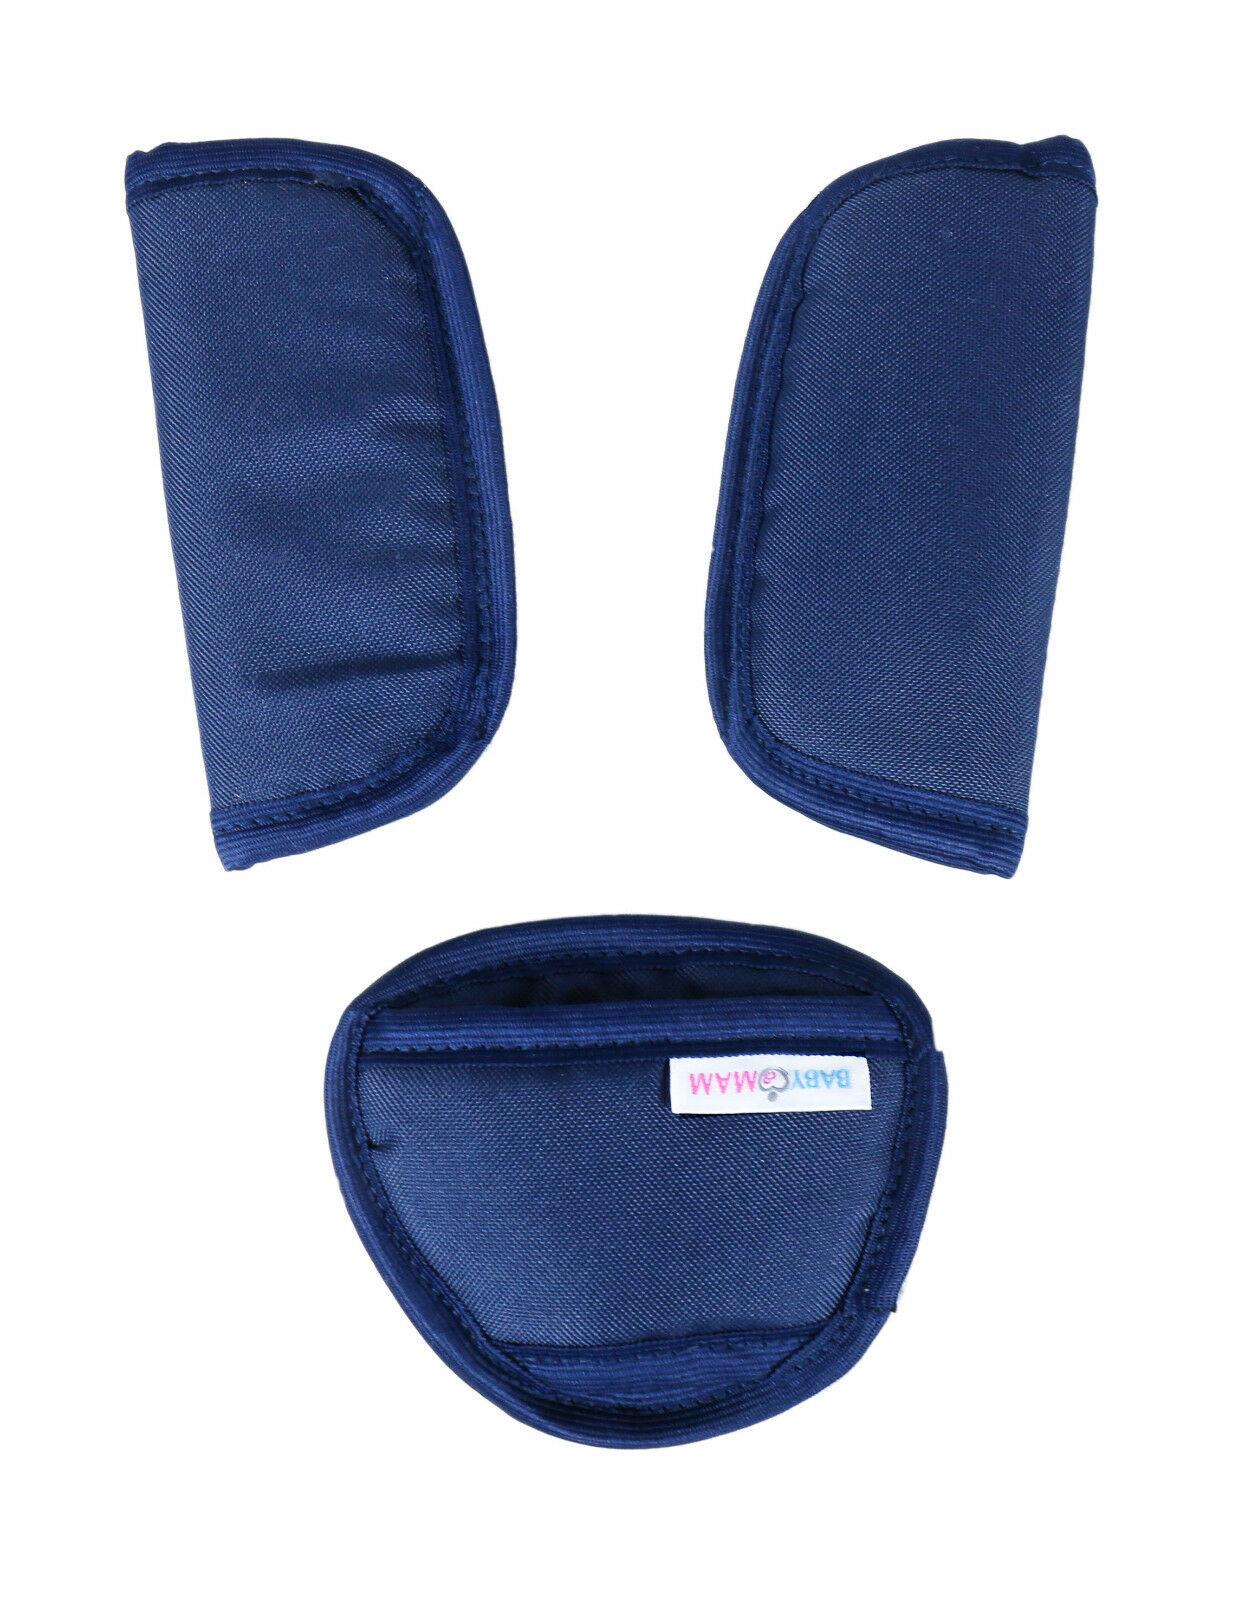 Baby Crotch Straps Pad Car Seat Belt Cover Harness Navy